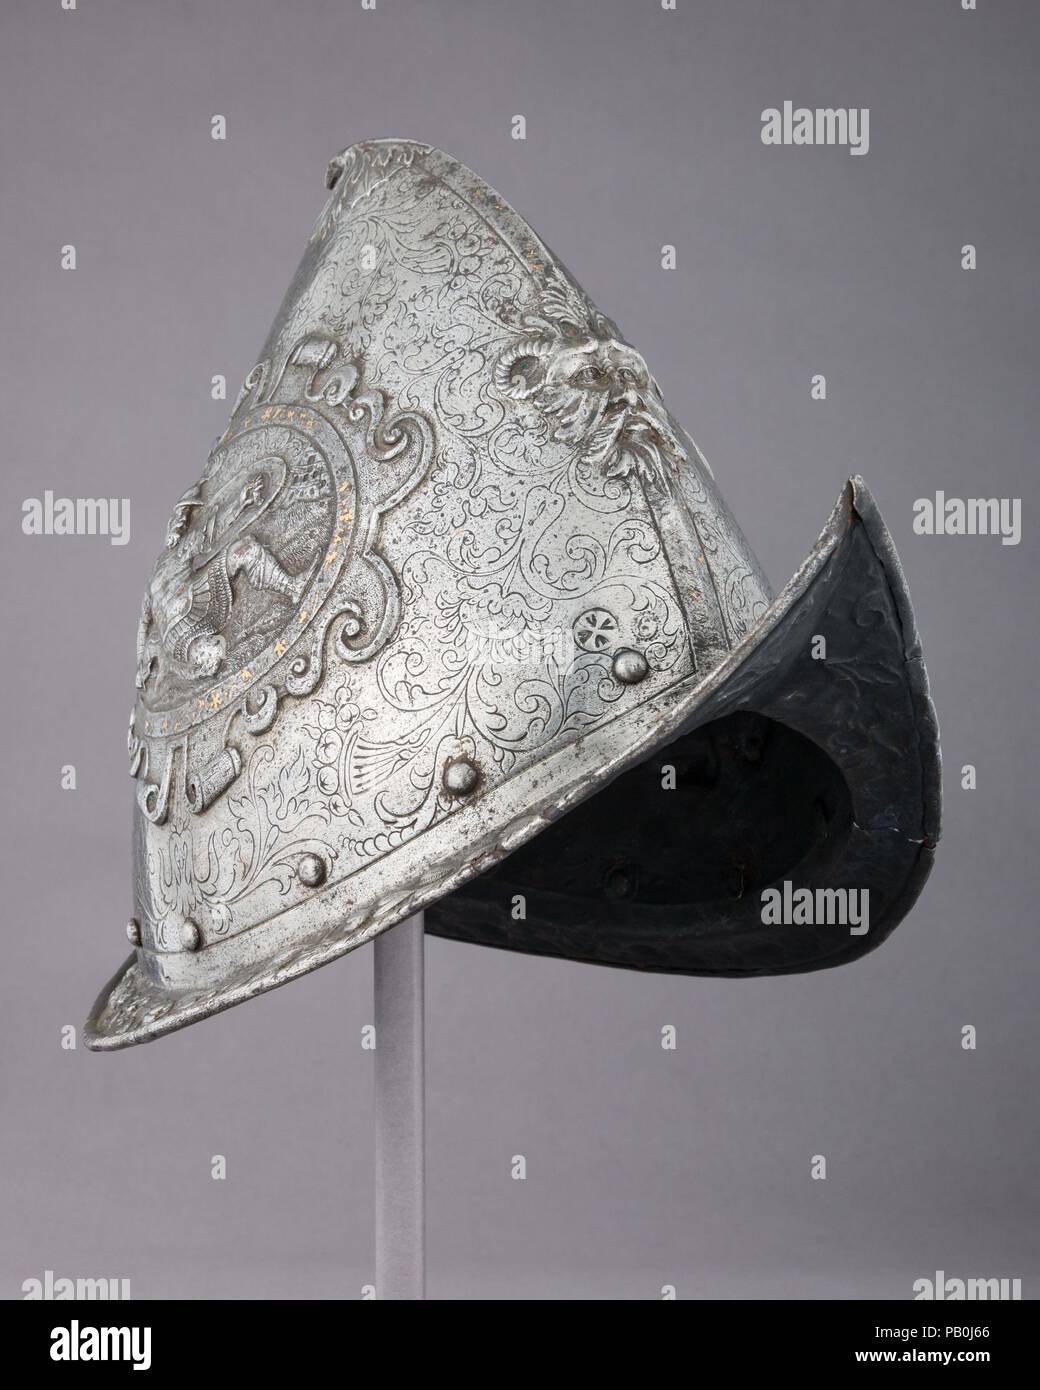 Morion-Cabasset. Culture: Italian. Dimensions: H. 10 1/2 in. (26.7 cm); W. 8 3/4 in. (22.2 cm); D. 14 1/4 in. (36.2 cm); Wt. 3 lb. (1361 g). Date: ca. 1575. Museum: Metropolitan Museum of Art, New York, USA. Stock Photo